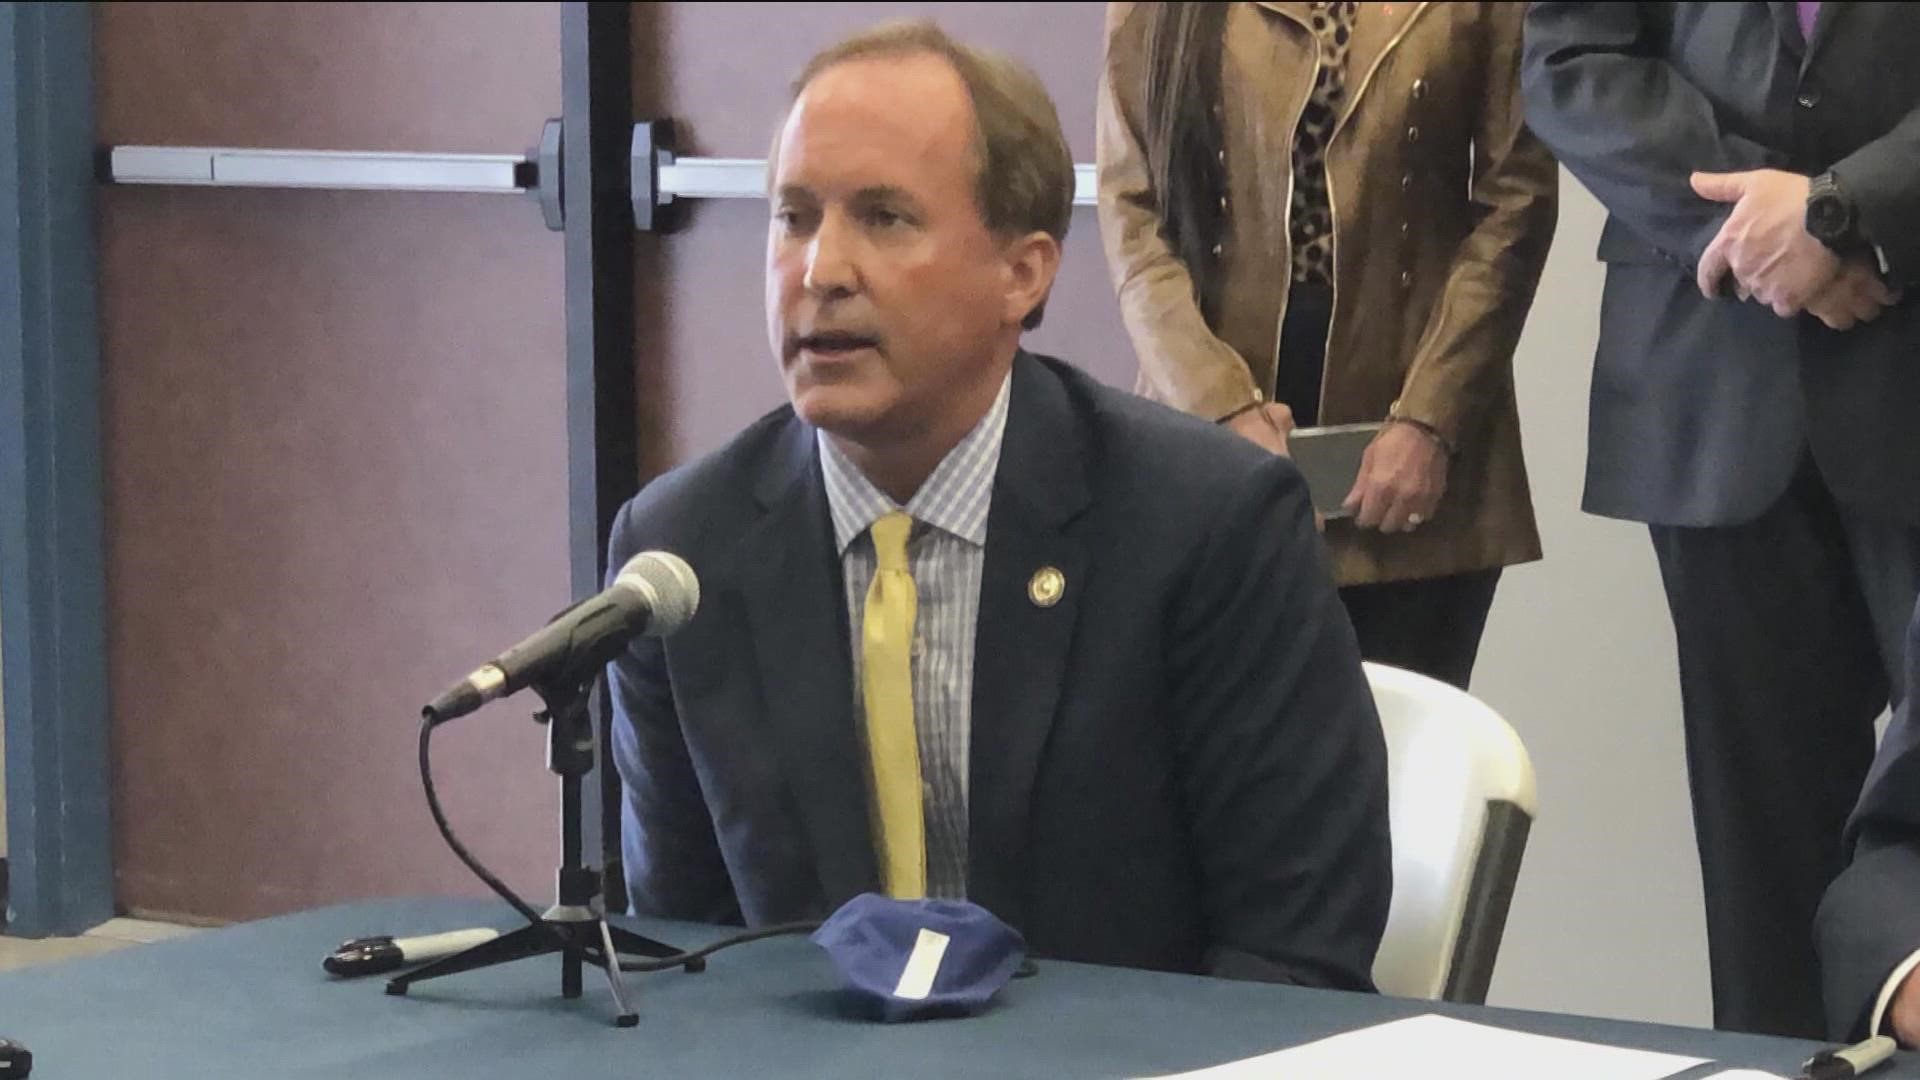 The judge in the case dropped Paxton's subpoena to appear Tuesday morning.